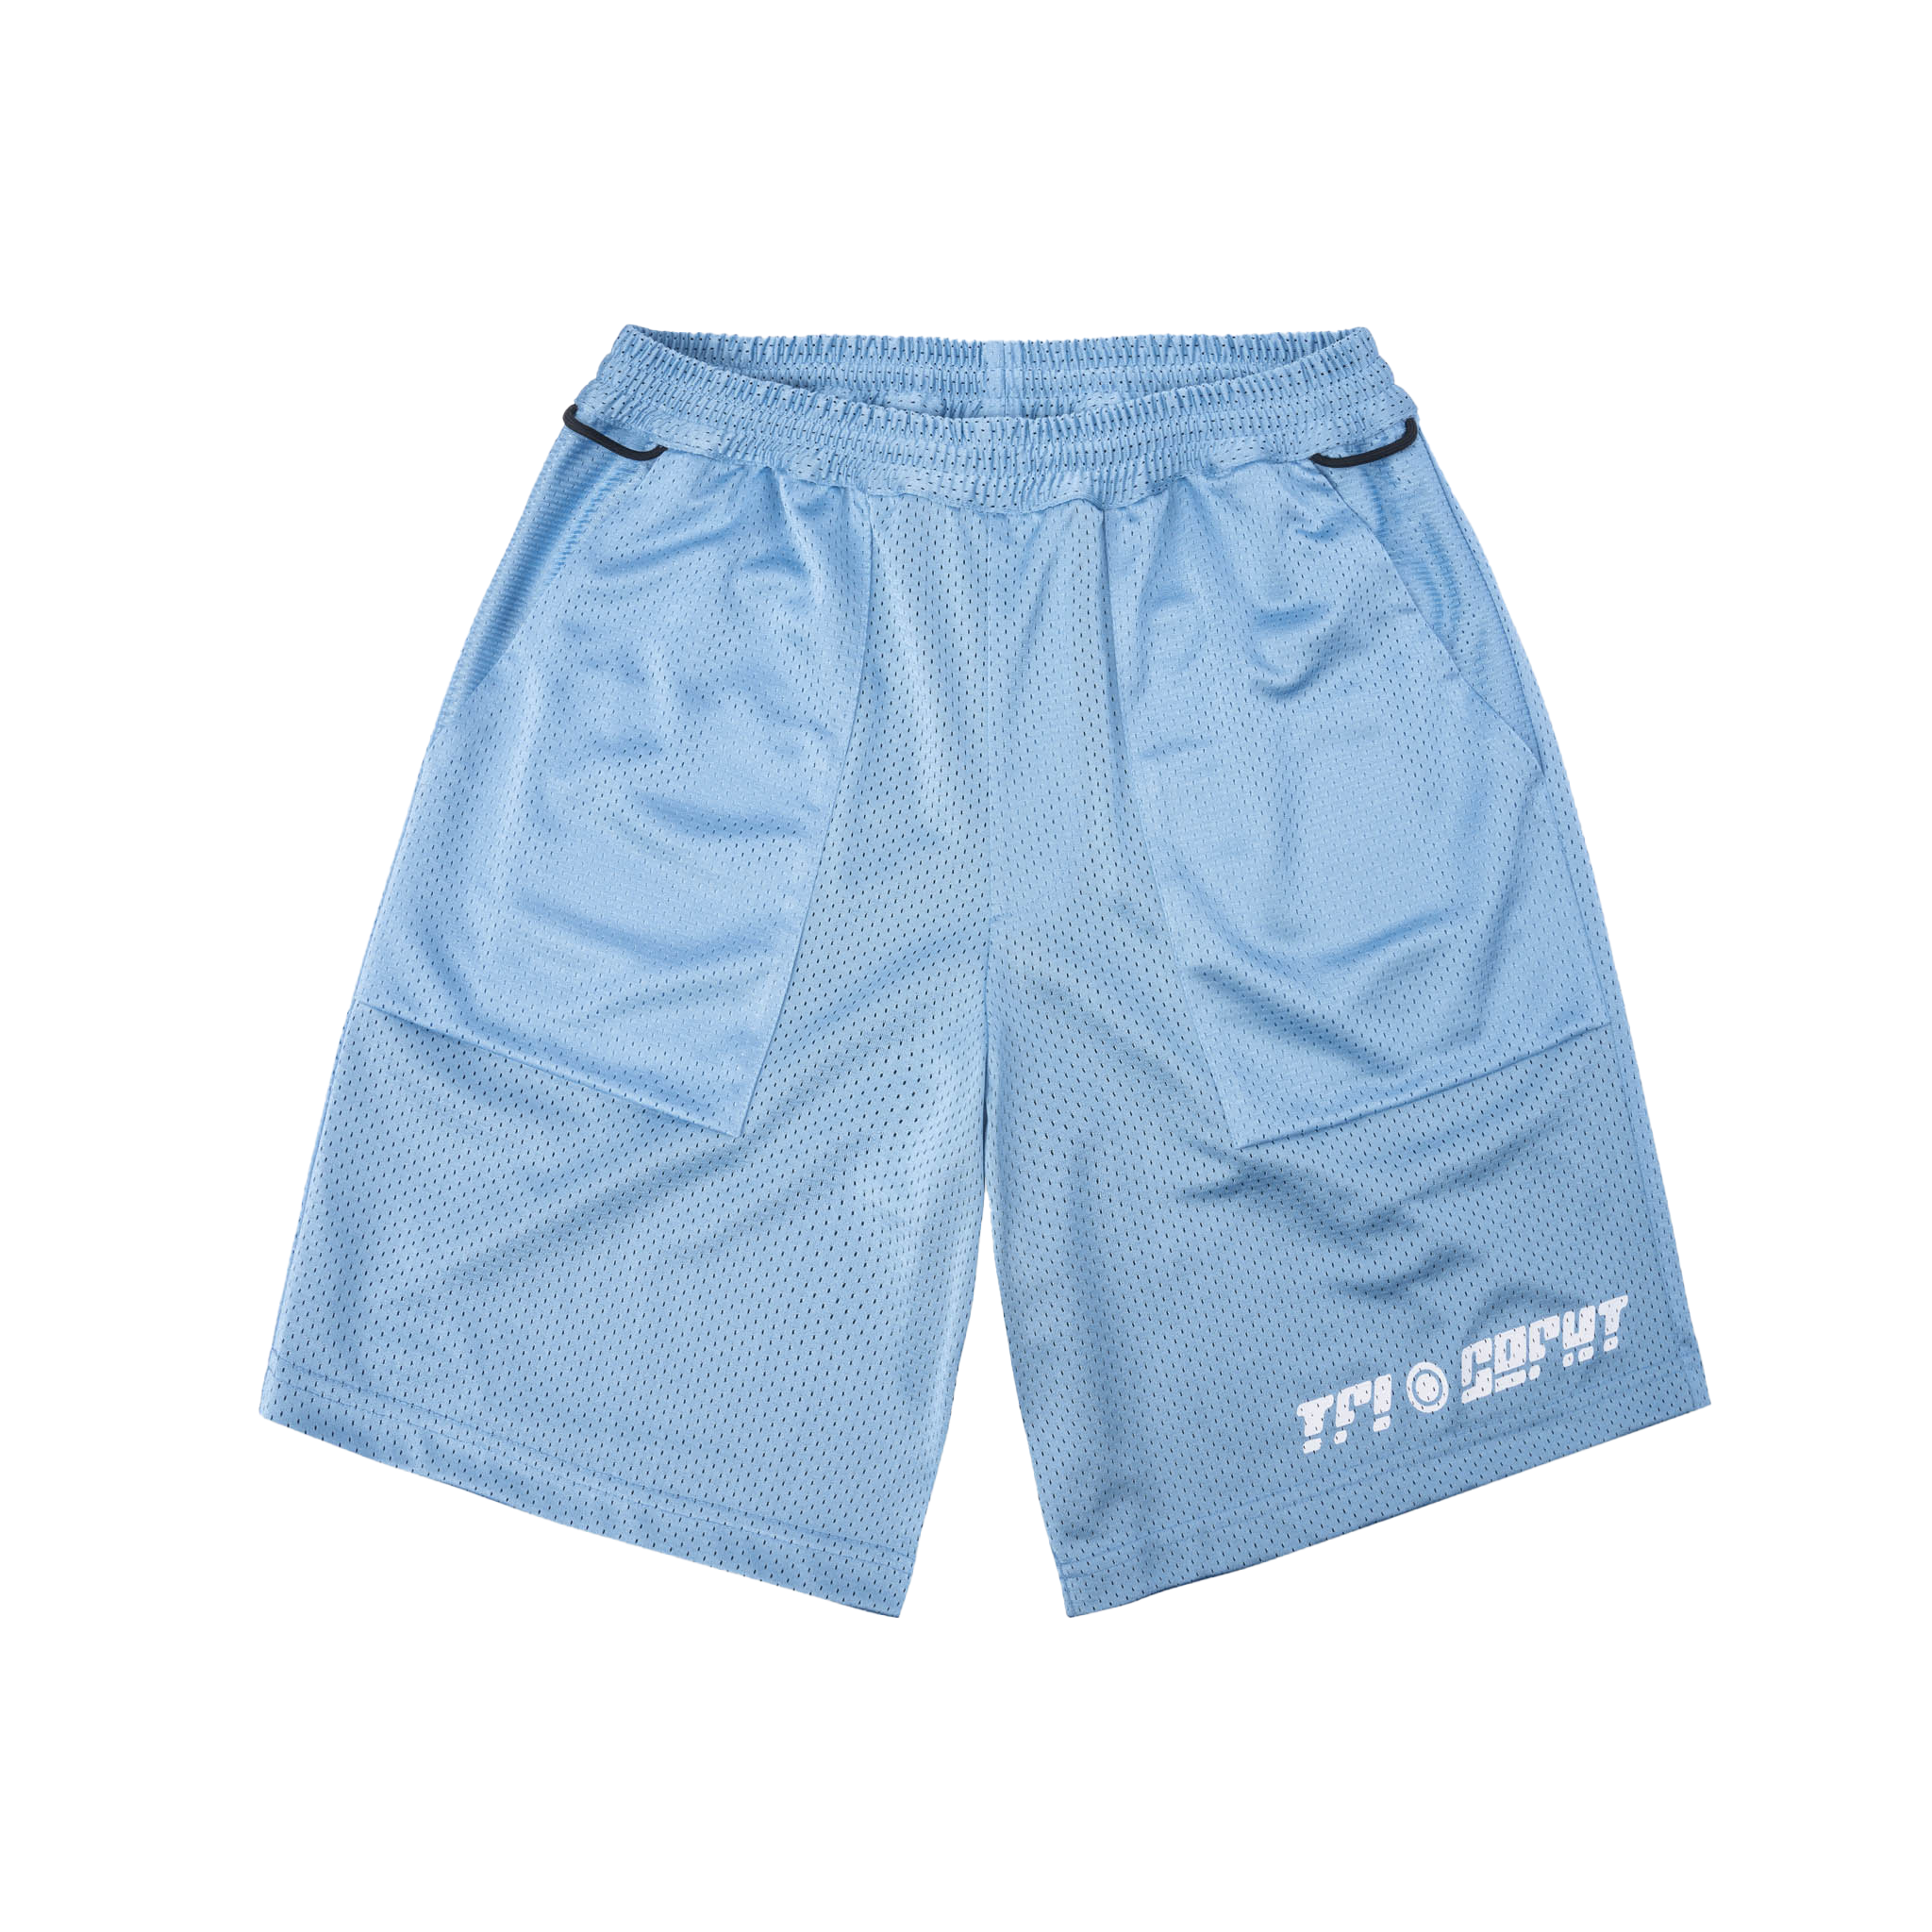 Goodfight x Tropical Futures Grocery Getter Cyber Cafe Shorts in Light Blue